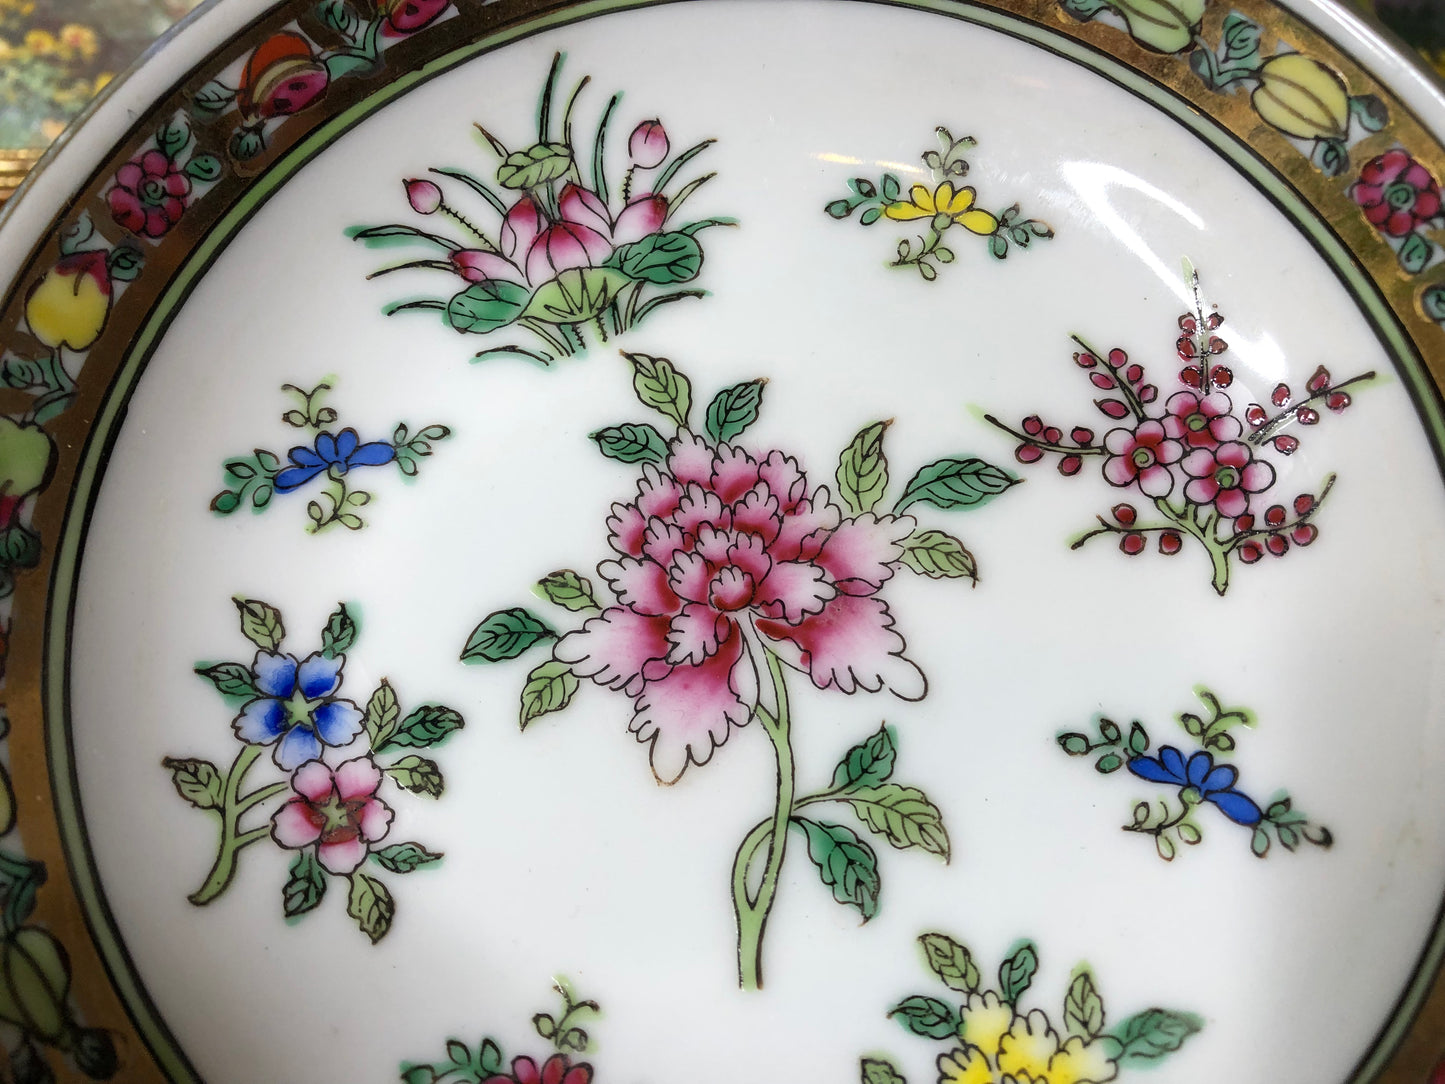 Sweetest floral trinket dish- Excellent condition!